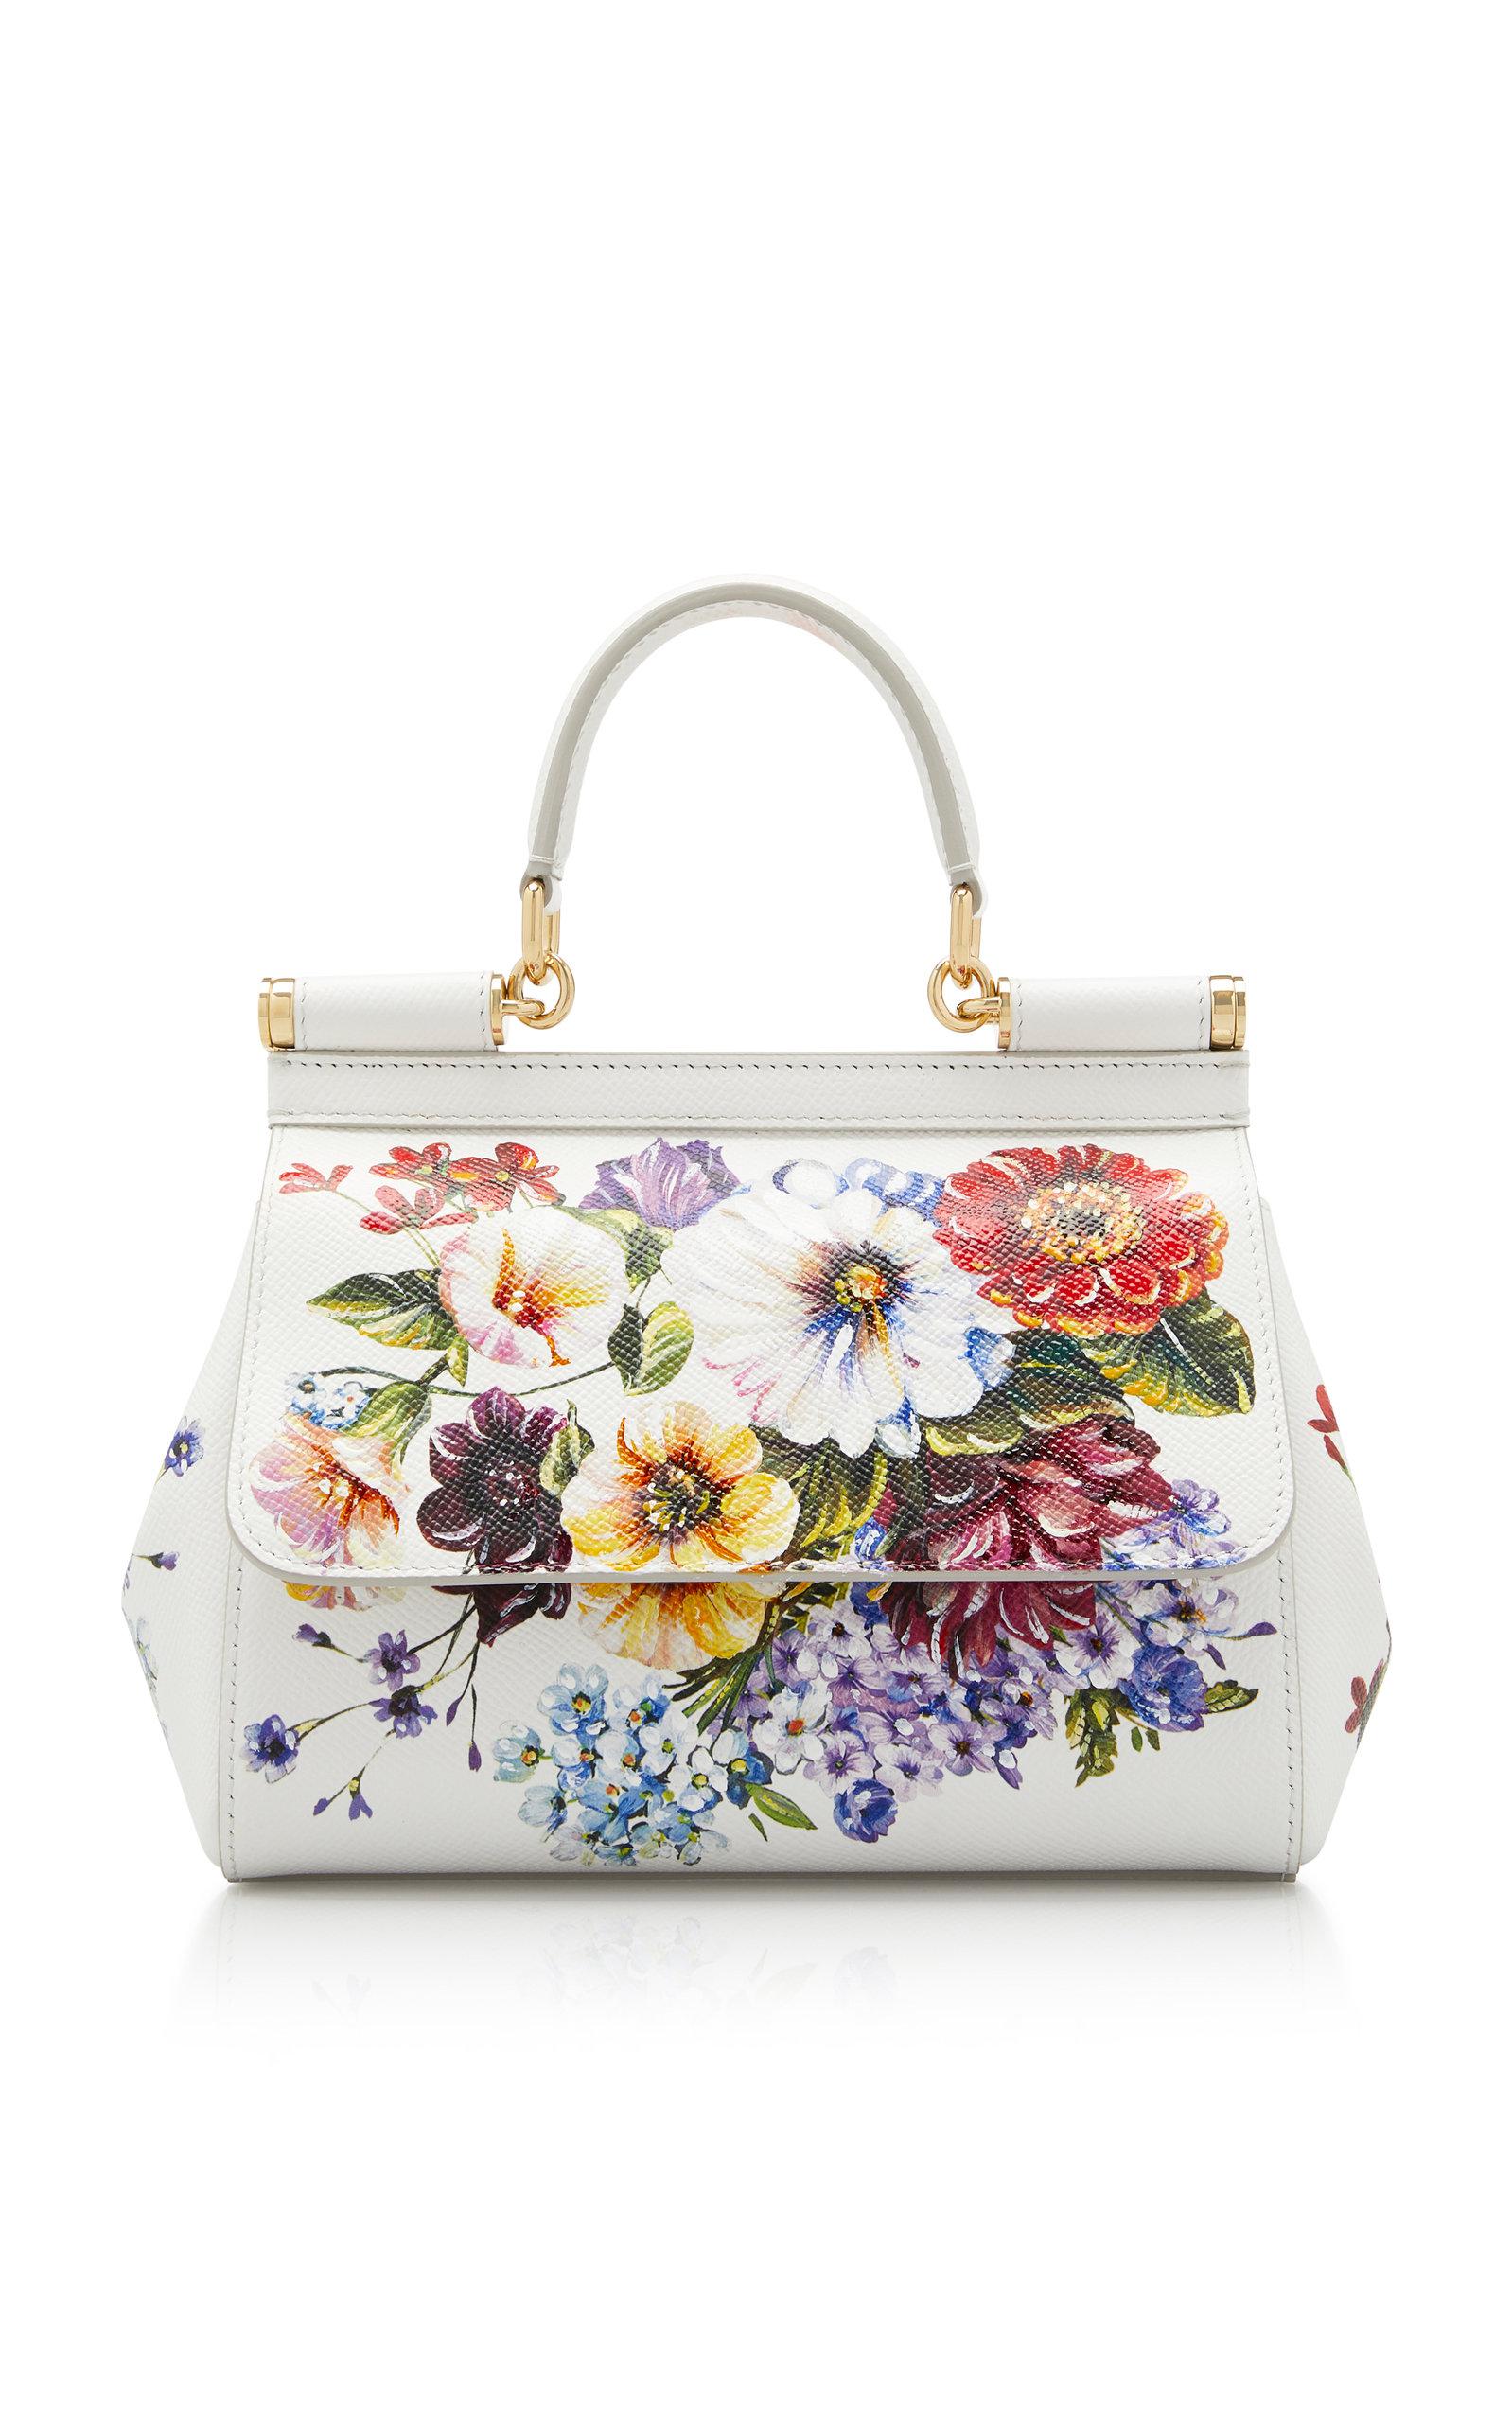 Dolce & Gabbana Dauphine Sicily Hand-painted Leather Bag in White | Lyst  Australia